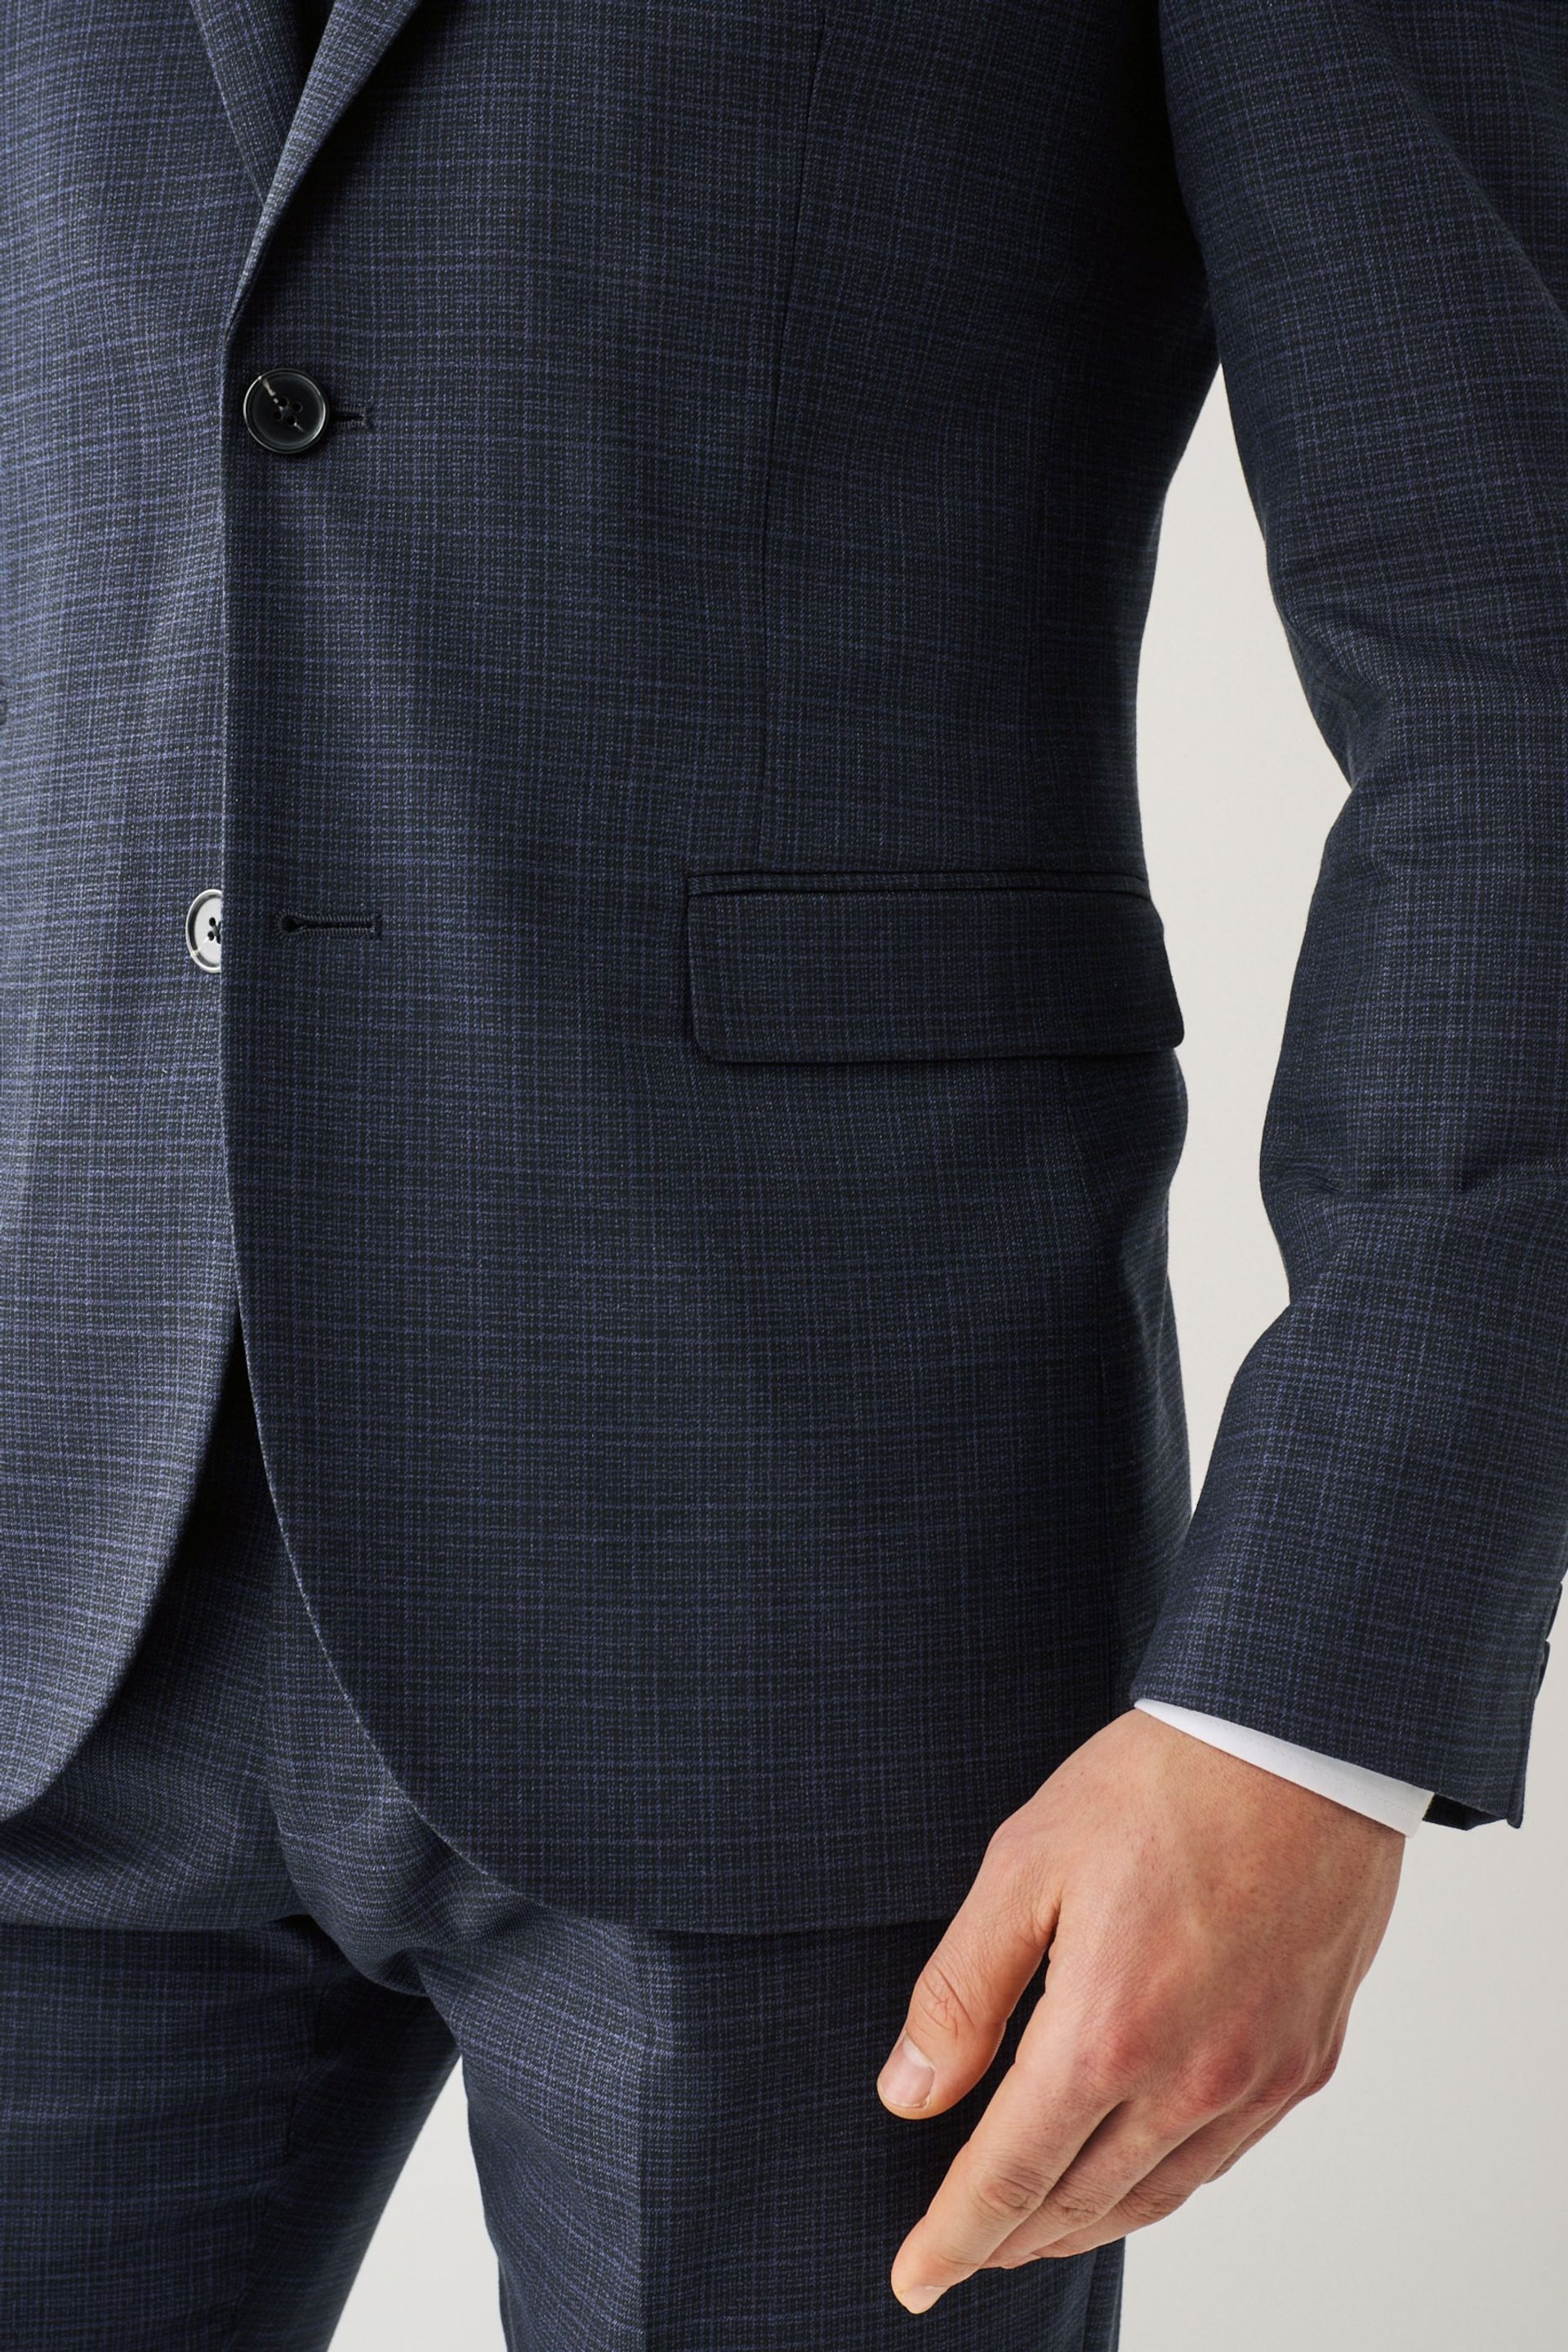 Navy Blue Skinny Check Suit Jacket - Image 5 of 13